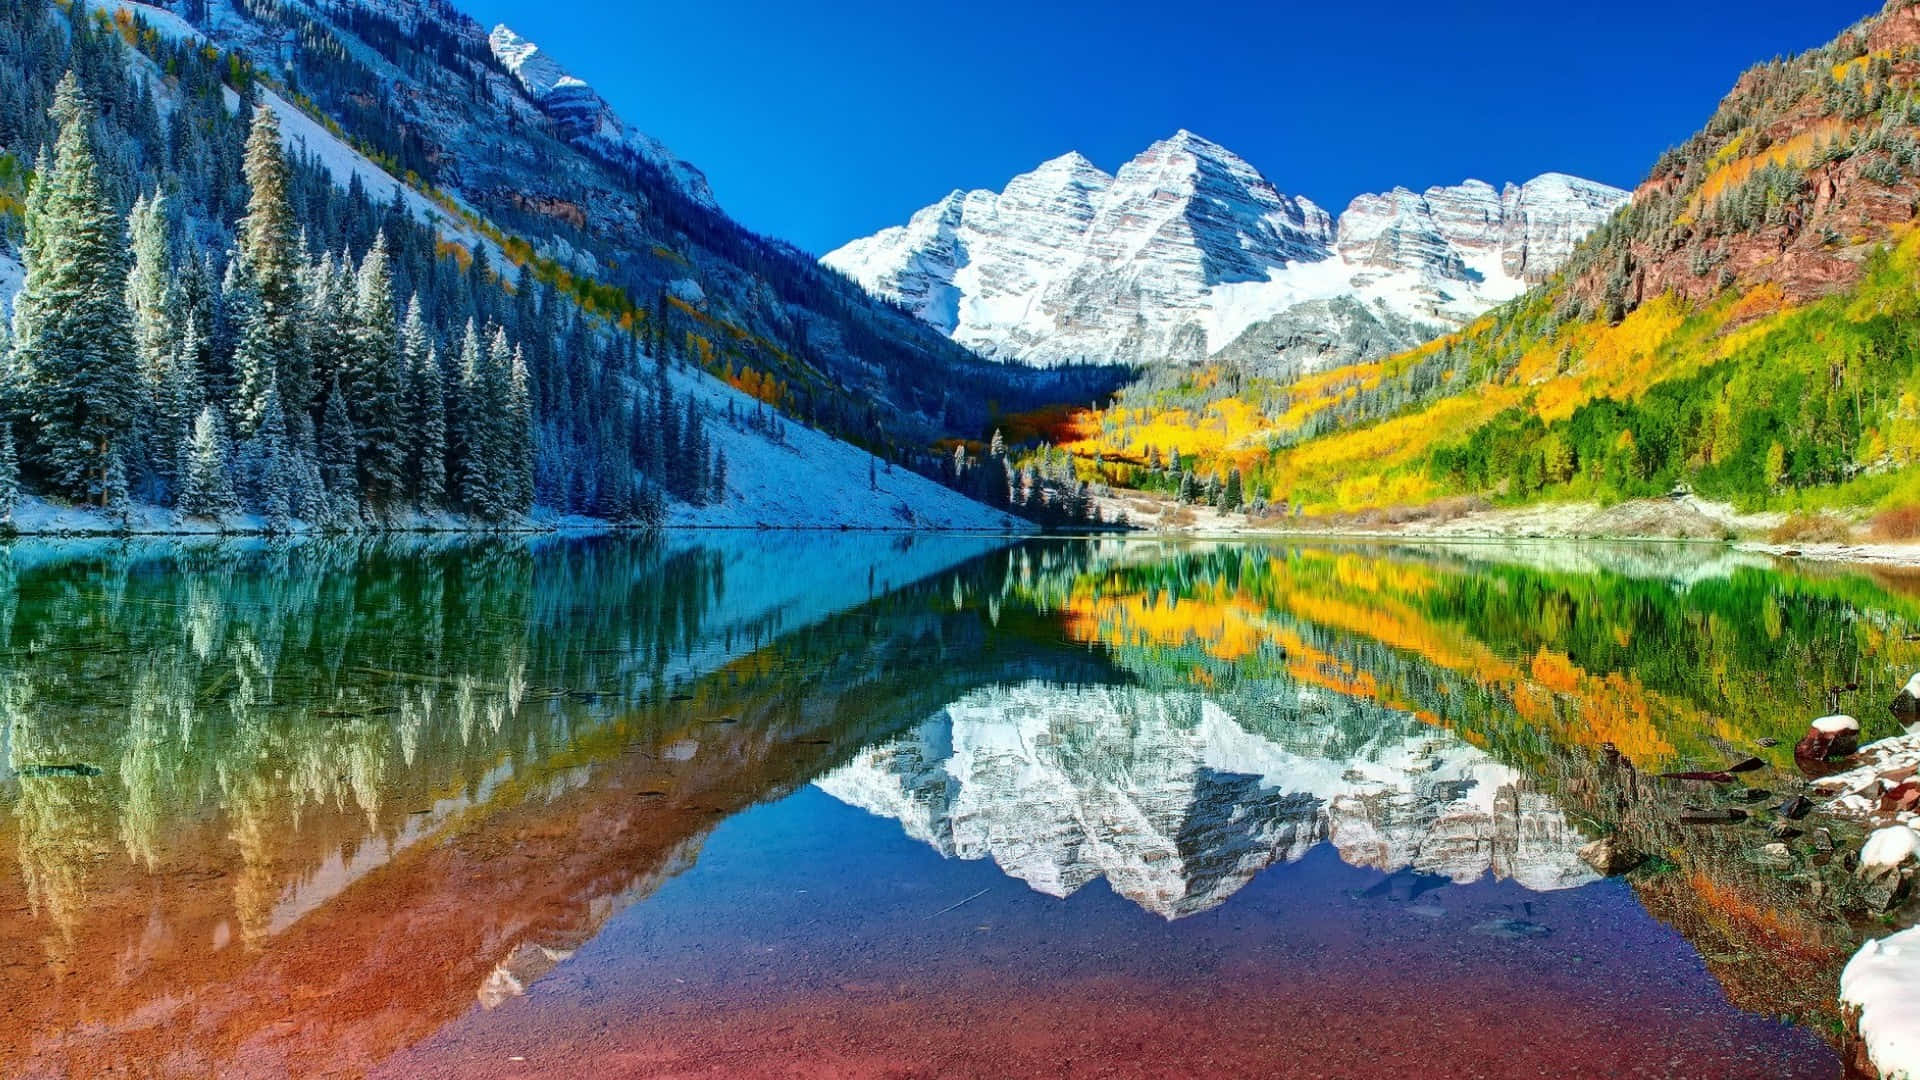 Enjoy the Panoramic View of Colorado's Famous Aspen